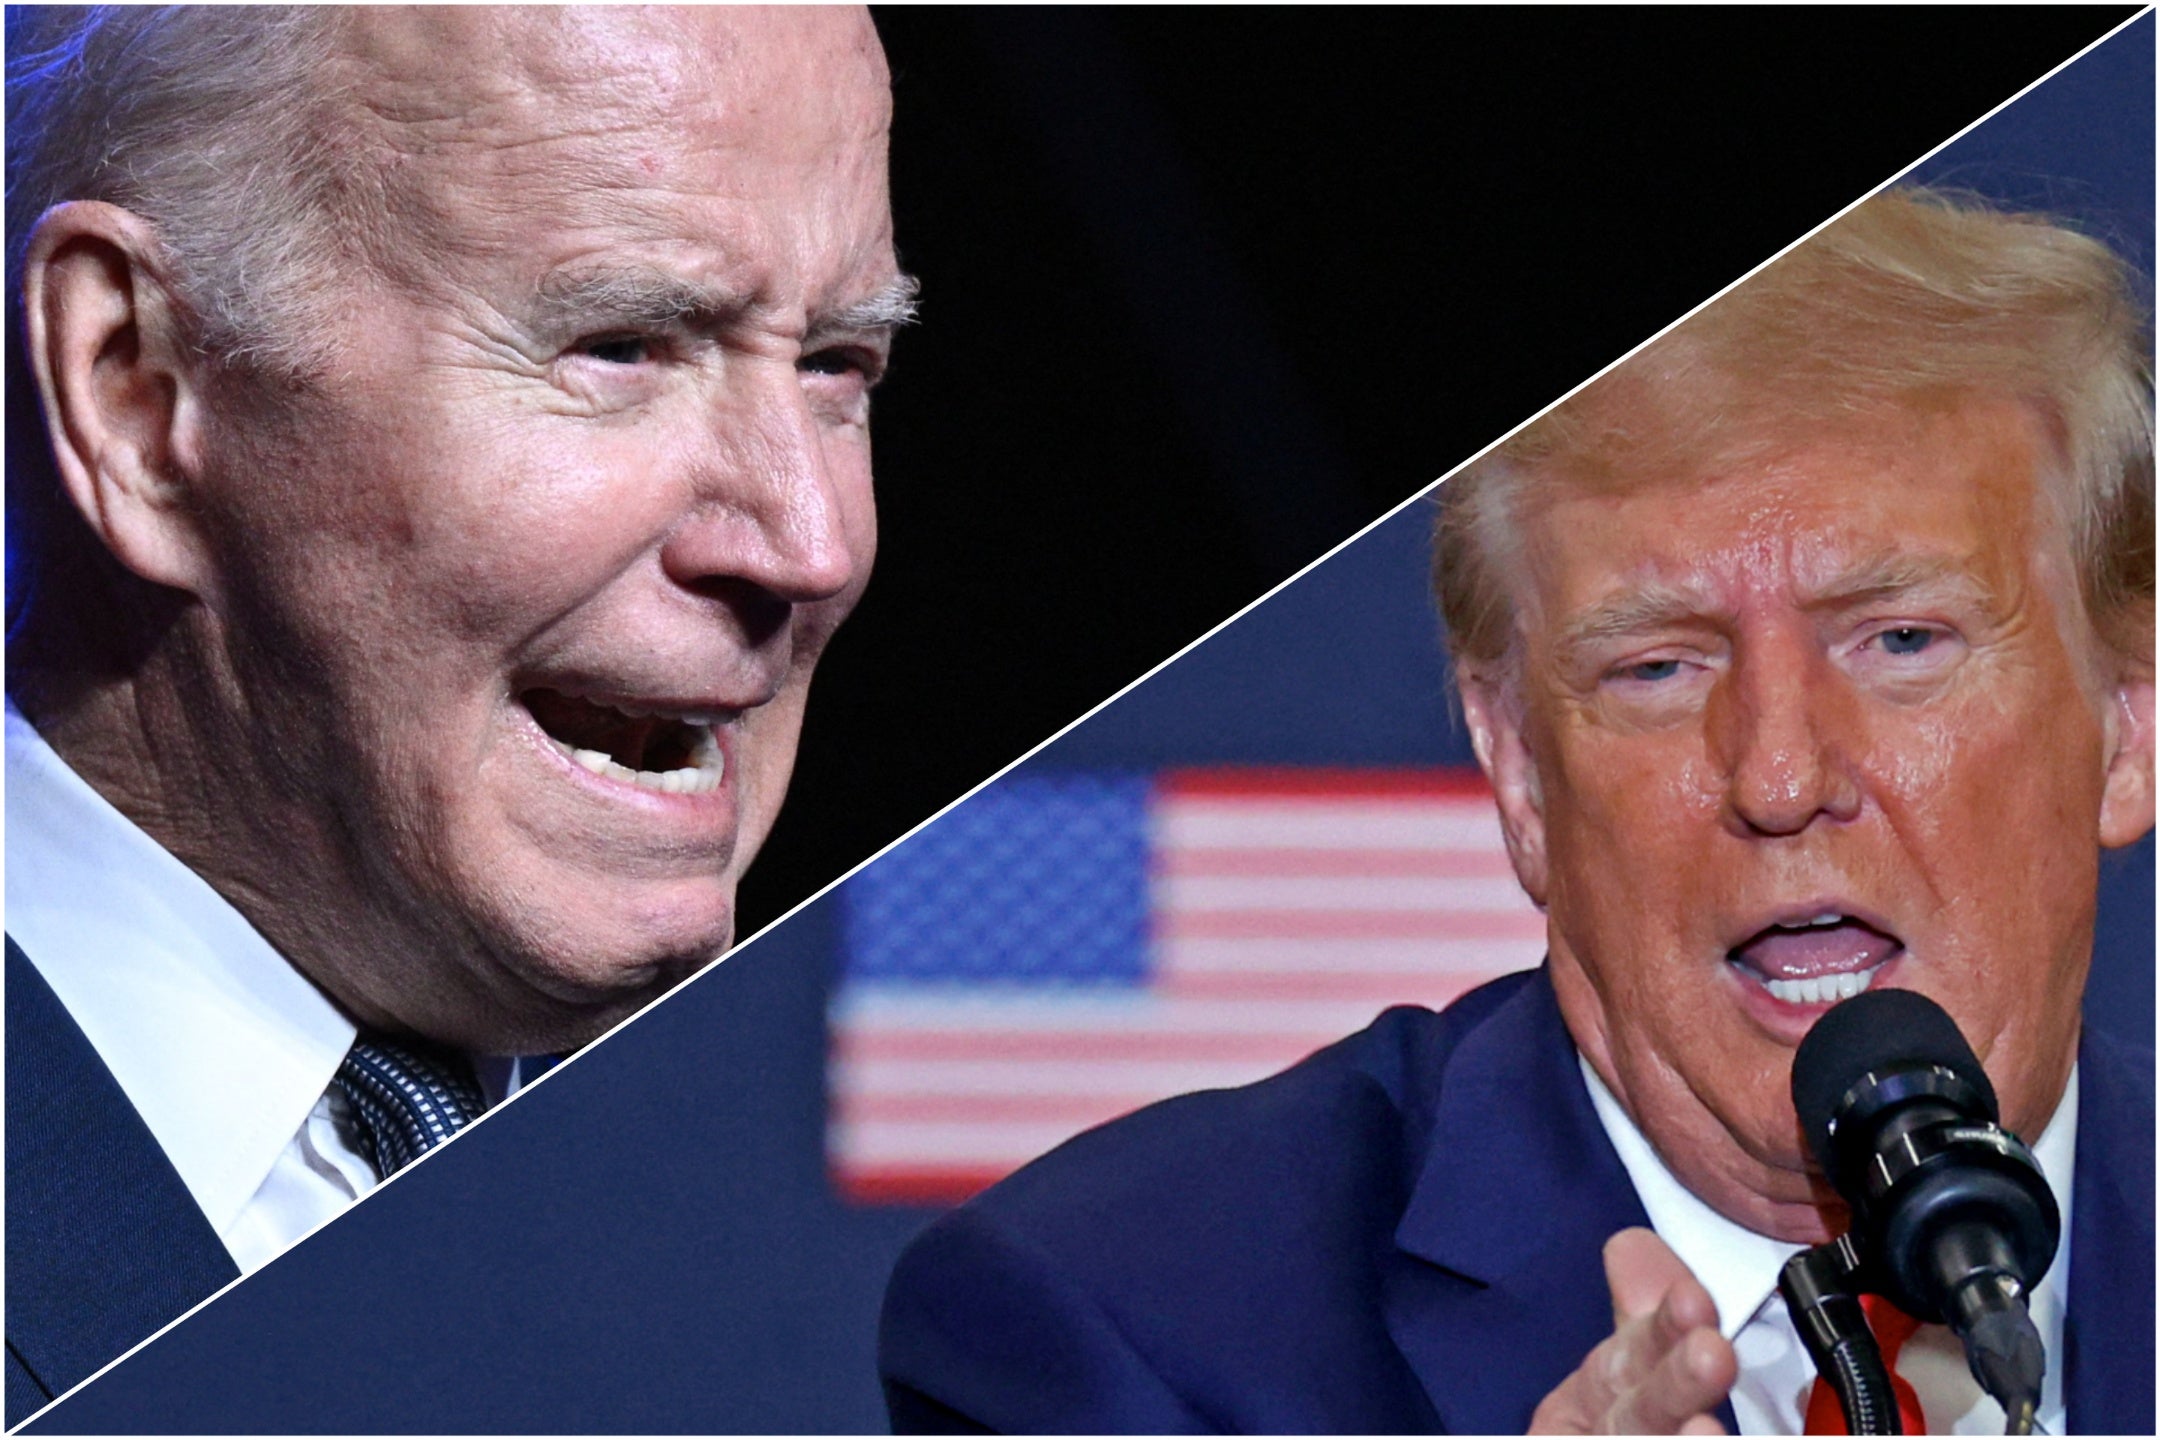 The Biden campaign has been pushing hard to remind voters why they ousted Trump in 2020